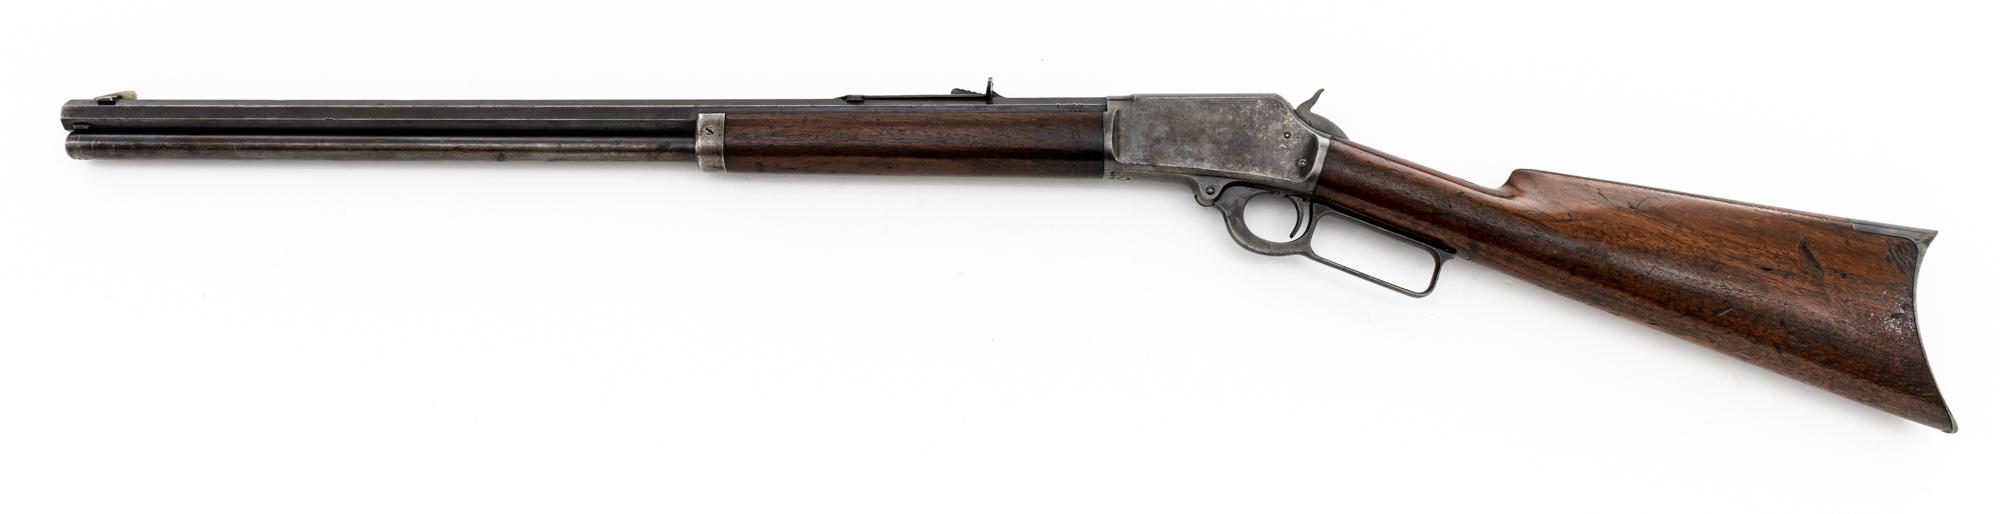 Antique Marlin Model 1894 Lever Action Rifle